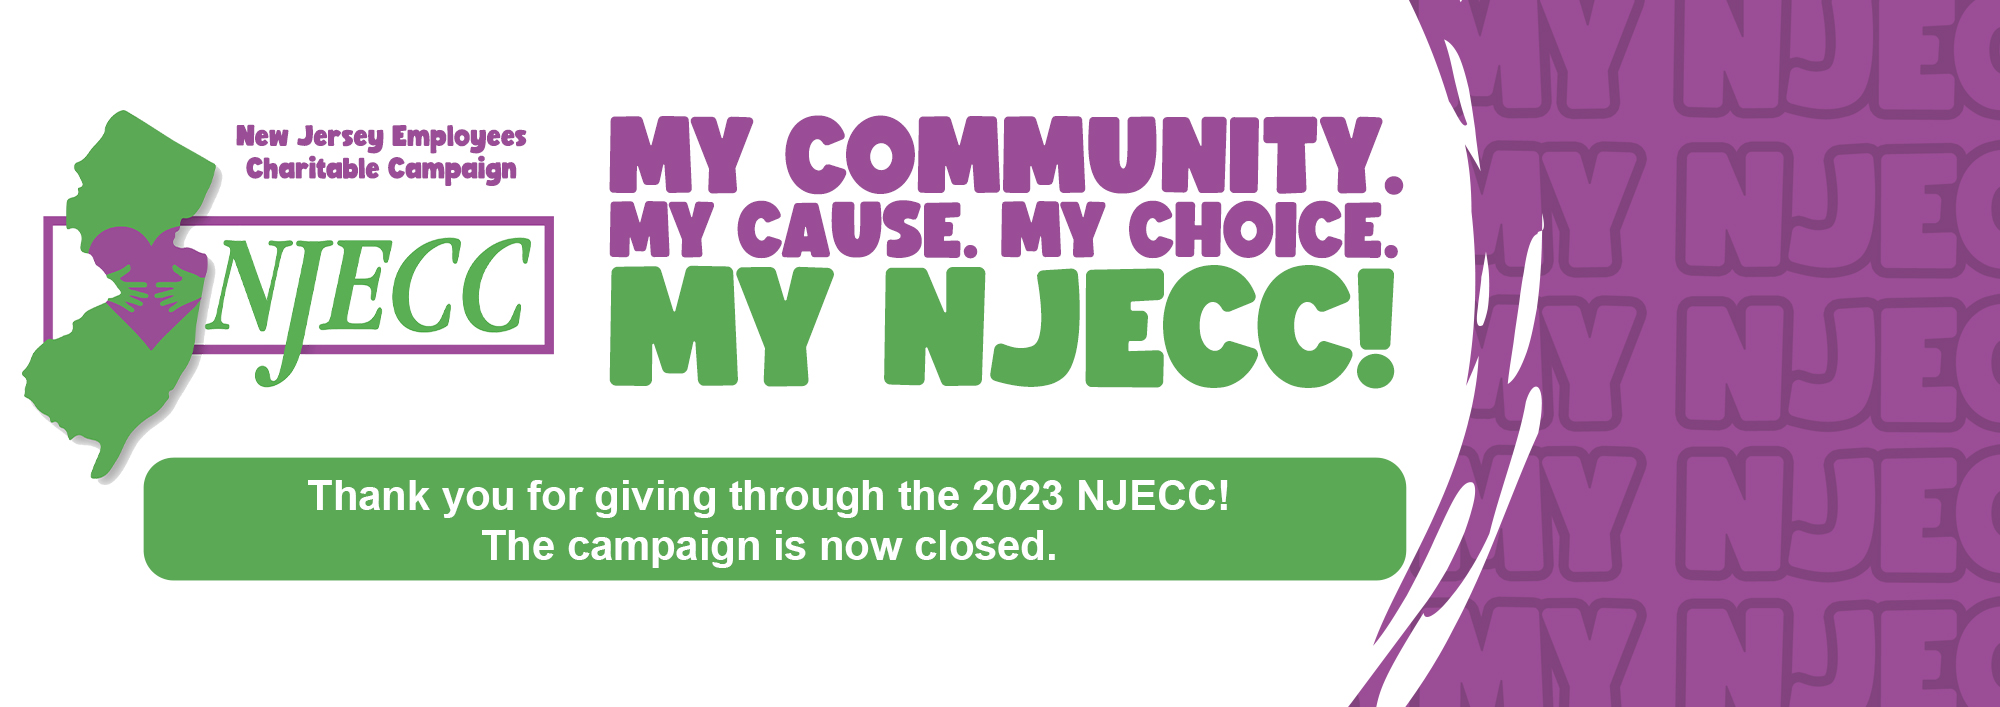 2023 NJECC net site banner – thank you campaign closed